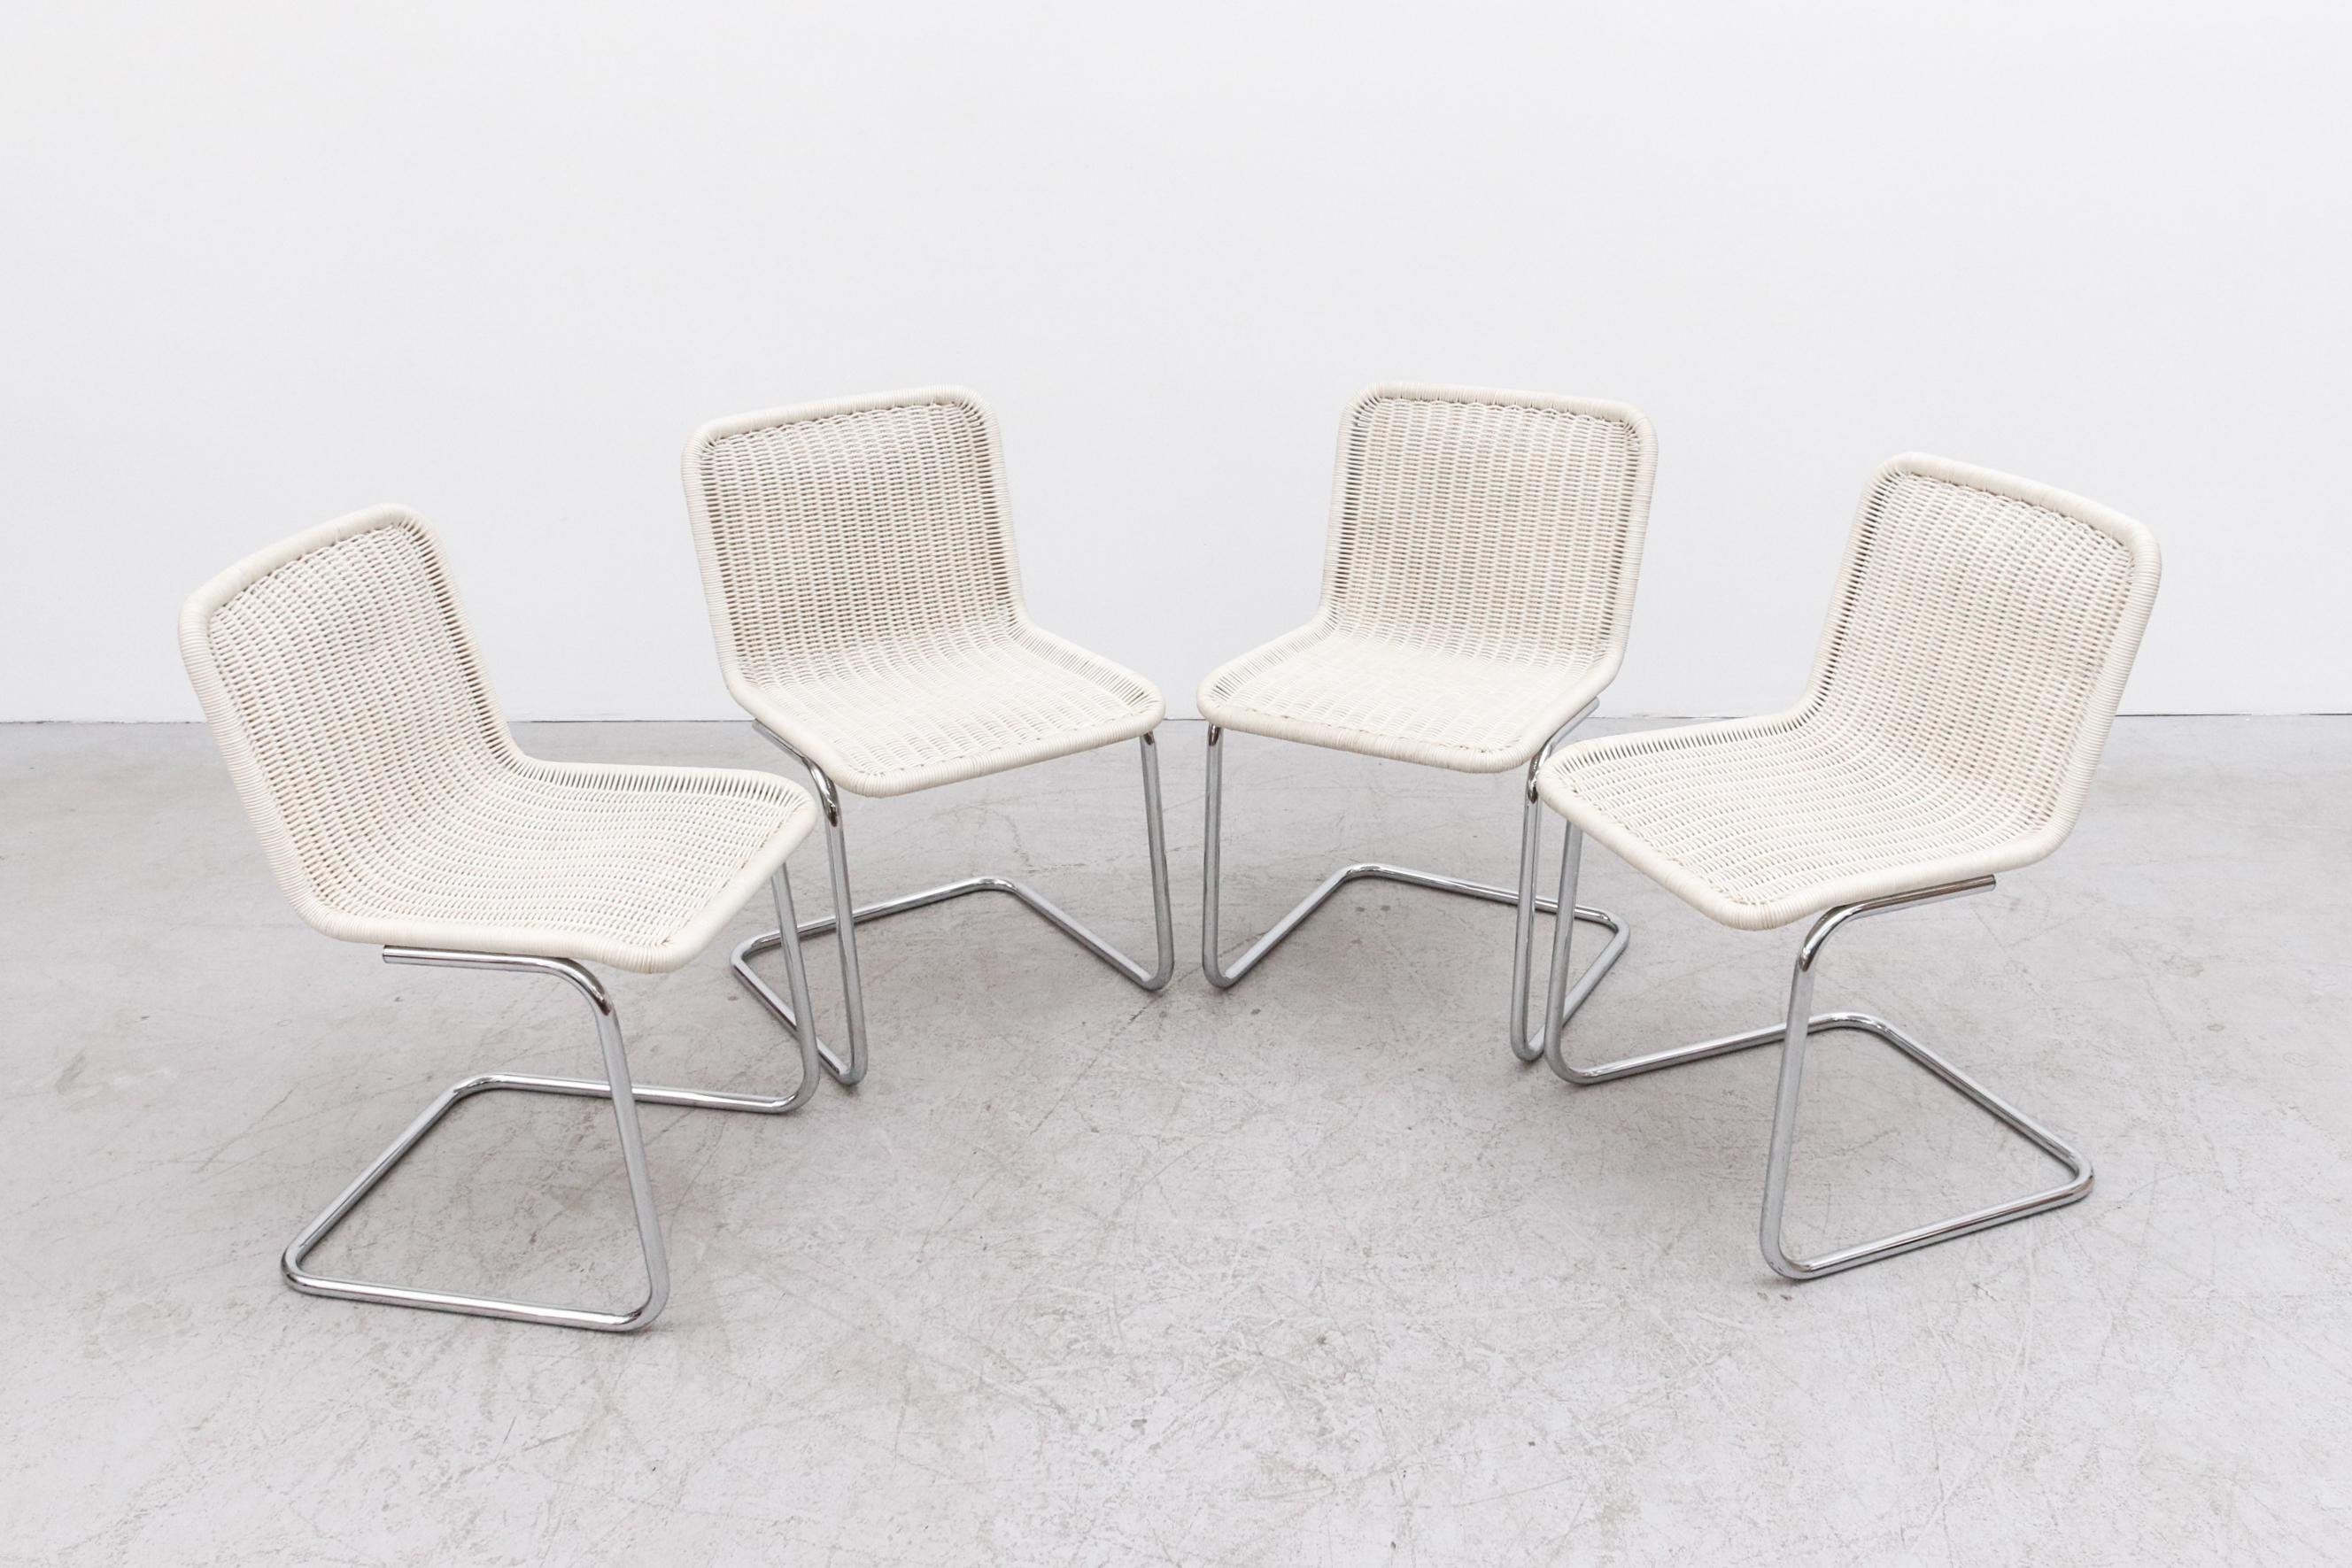 Set of 4 Marcel Breuer Style Woven Rattan and Chrome Chairs 1